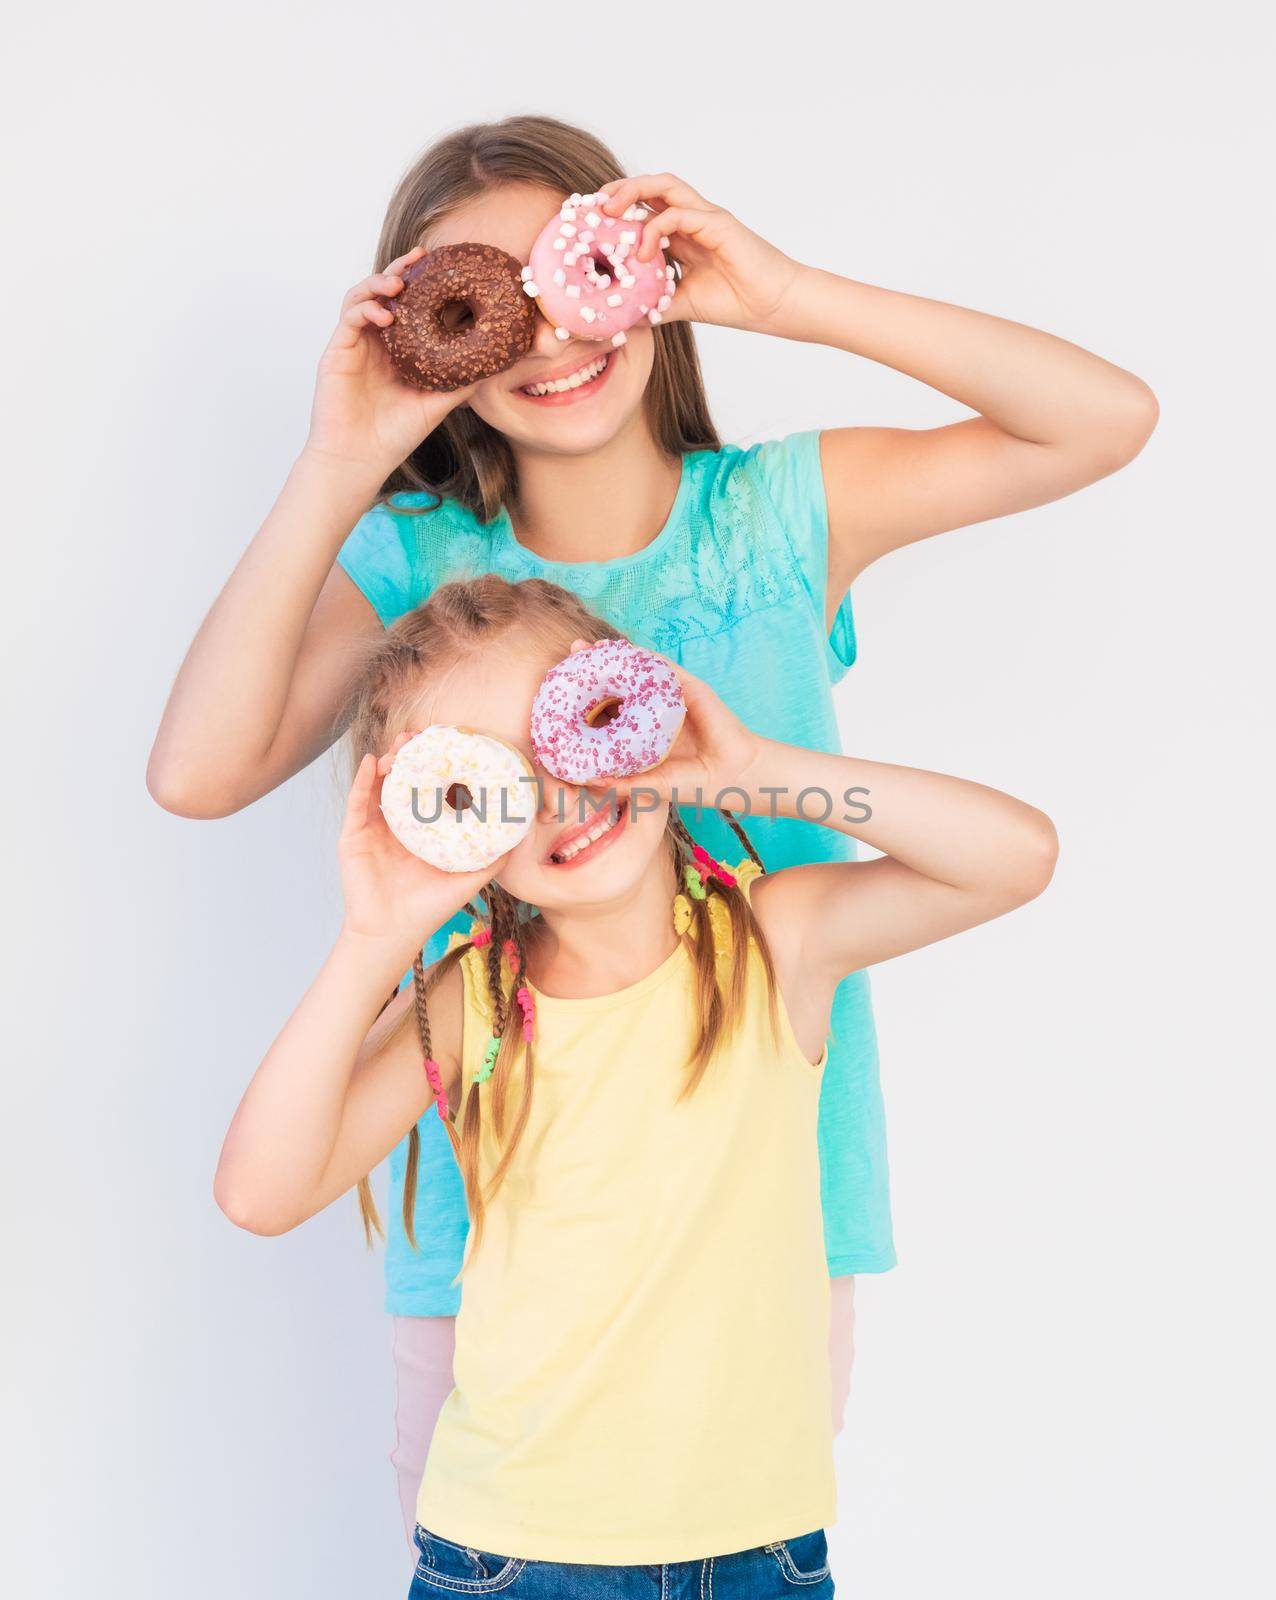 Two girls making funny jokes and joyful expressions using freshly baked donuts